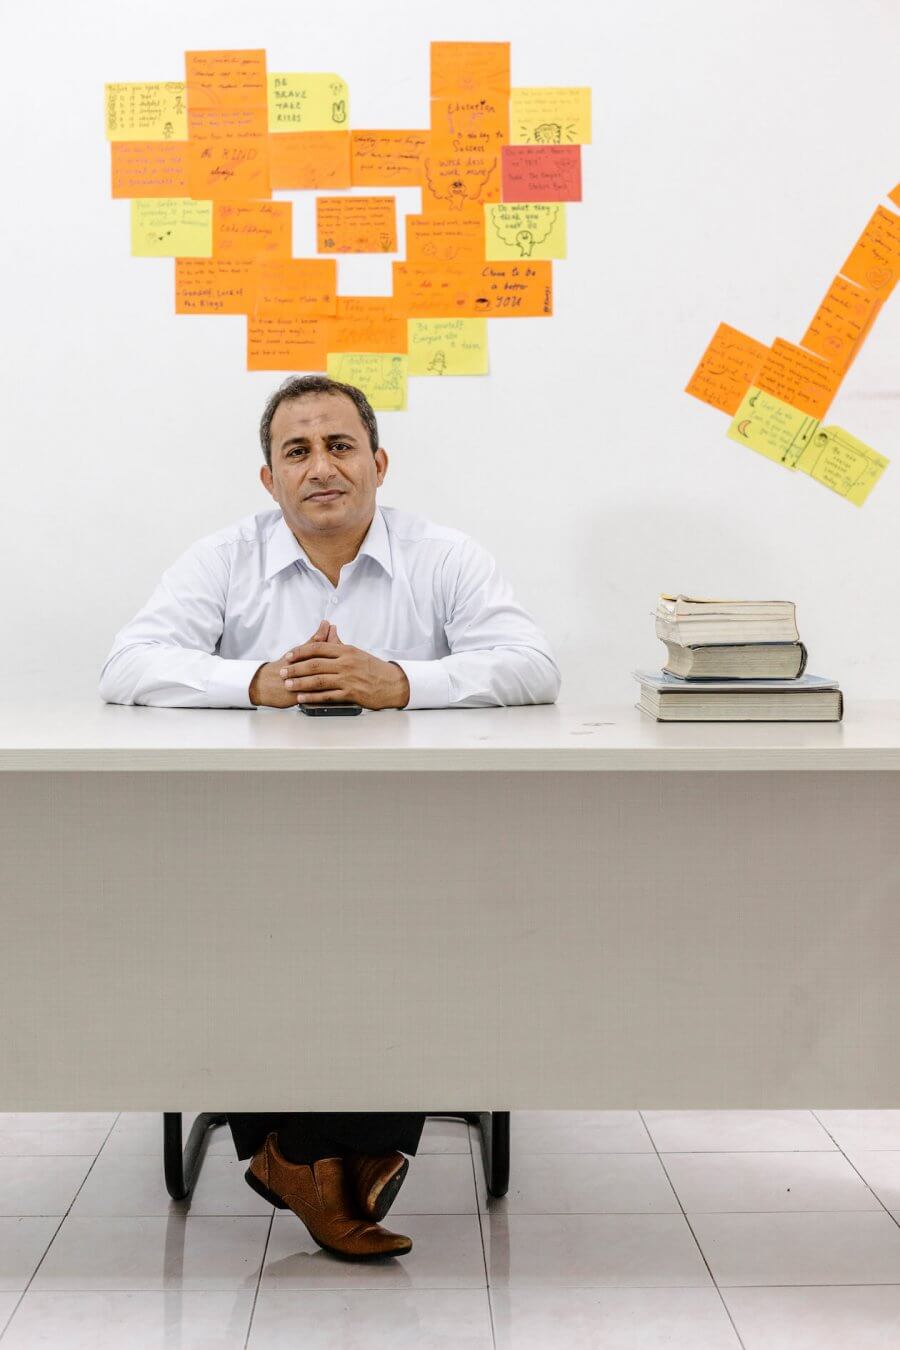 Mohamad Al-Radhi, sitting at desk with wall of sticky notes behind